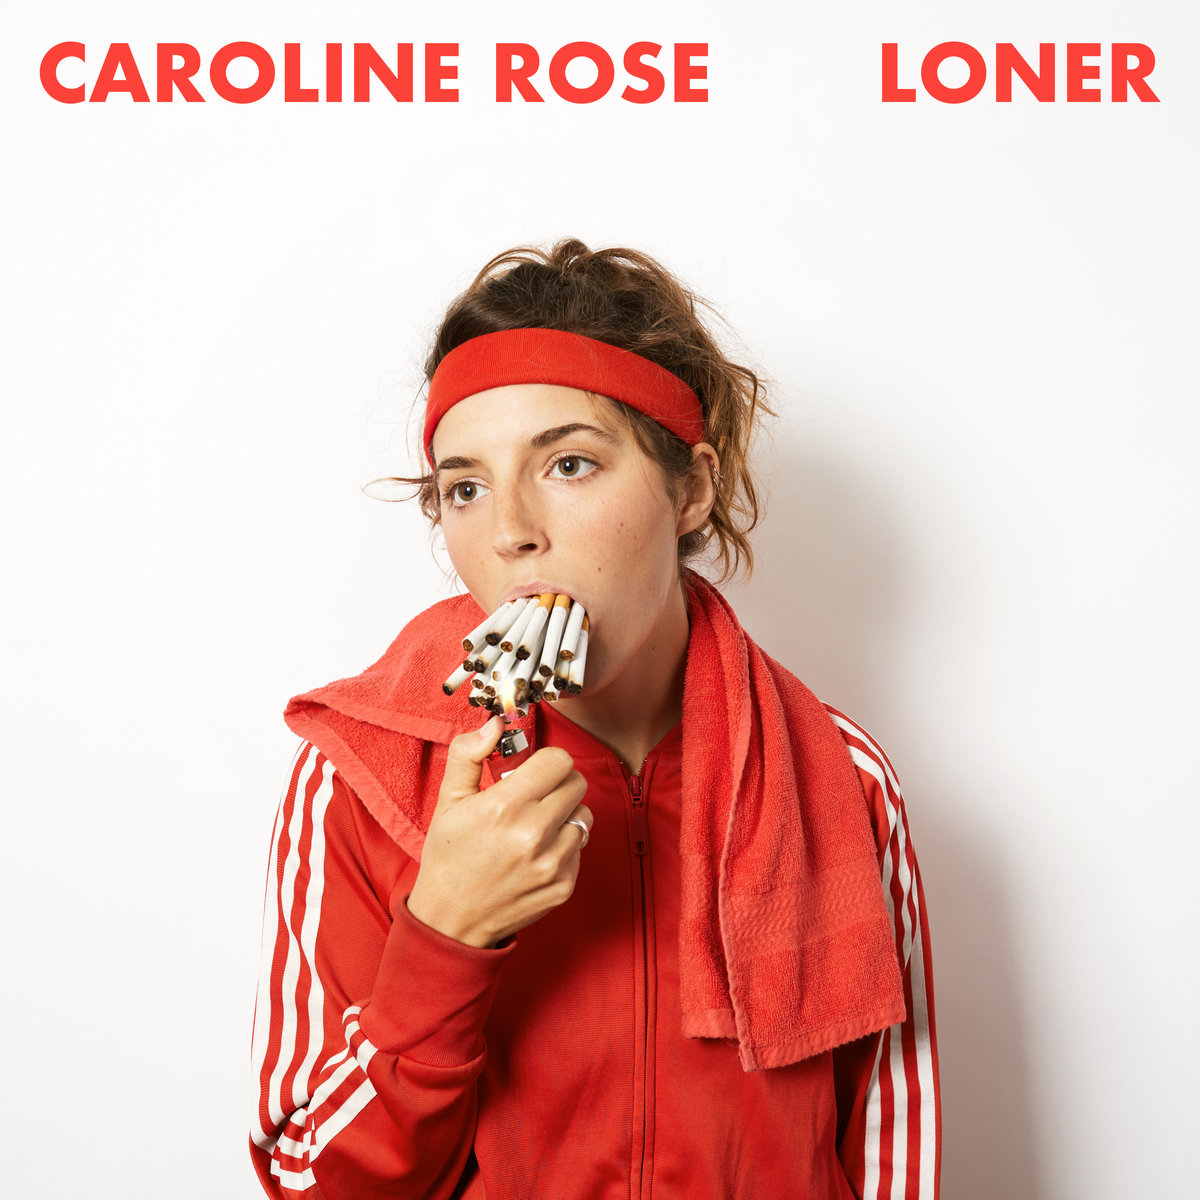 Northern Transmissions' review of 'Loner' by Caroline Rose